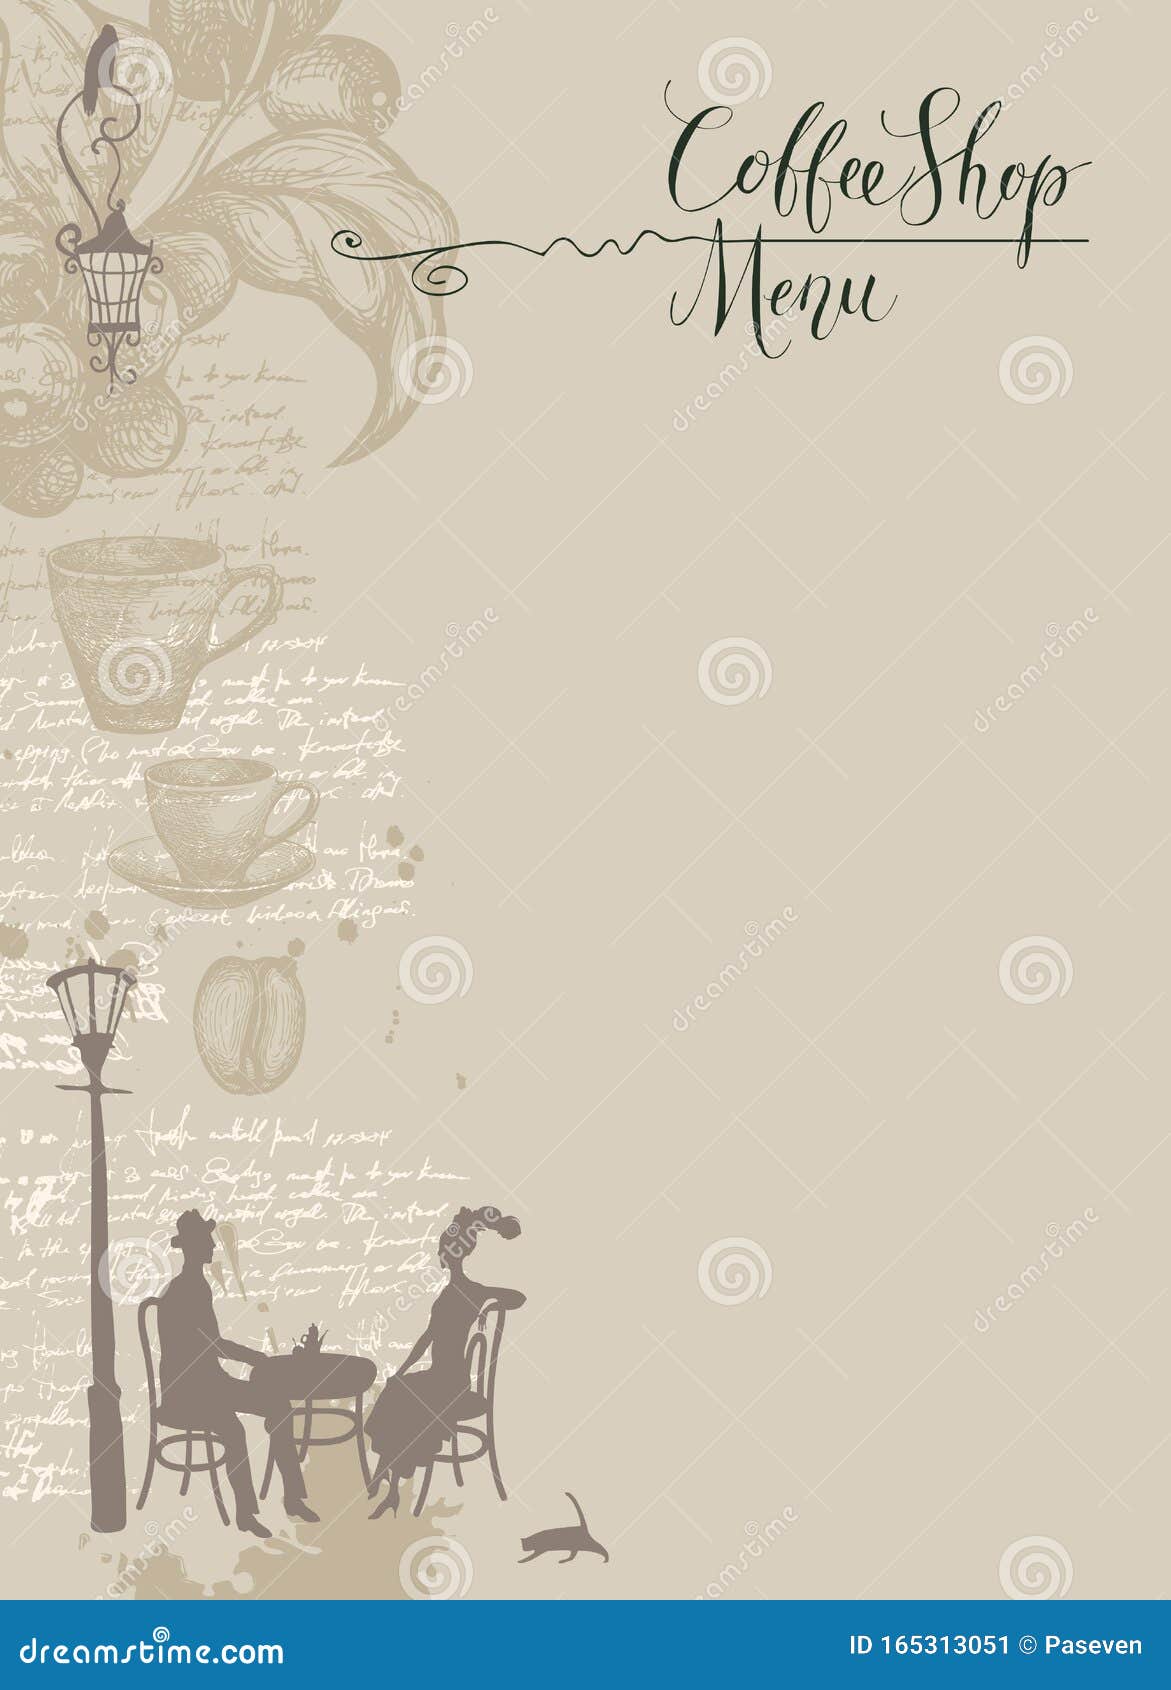 Vector Coffee Shop Menu with a Couple in Love Stock Vector - Illustration  of decoration, latte: 165313051